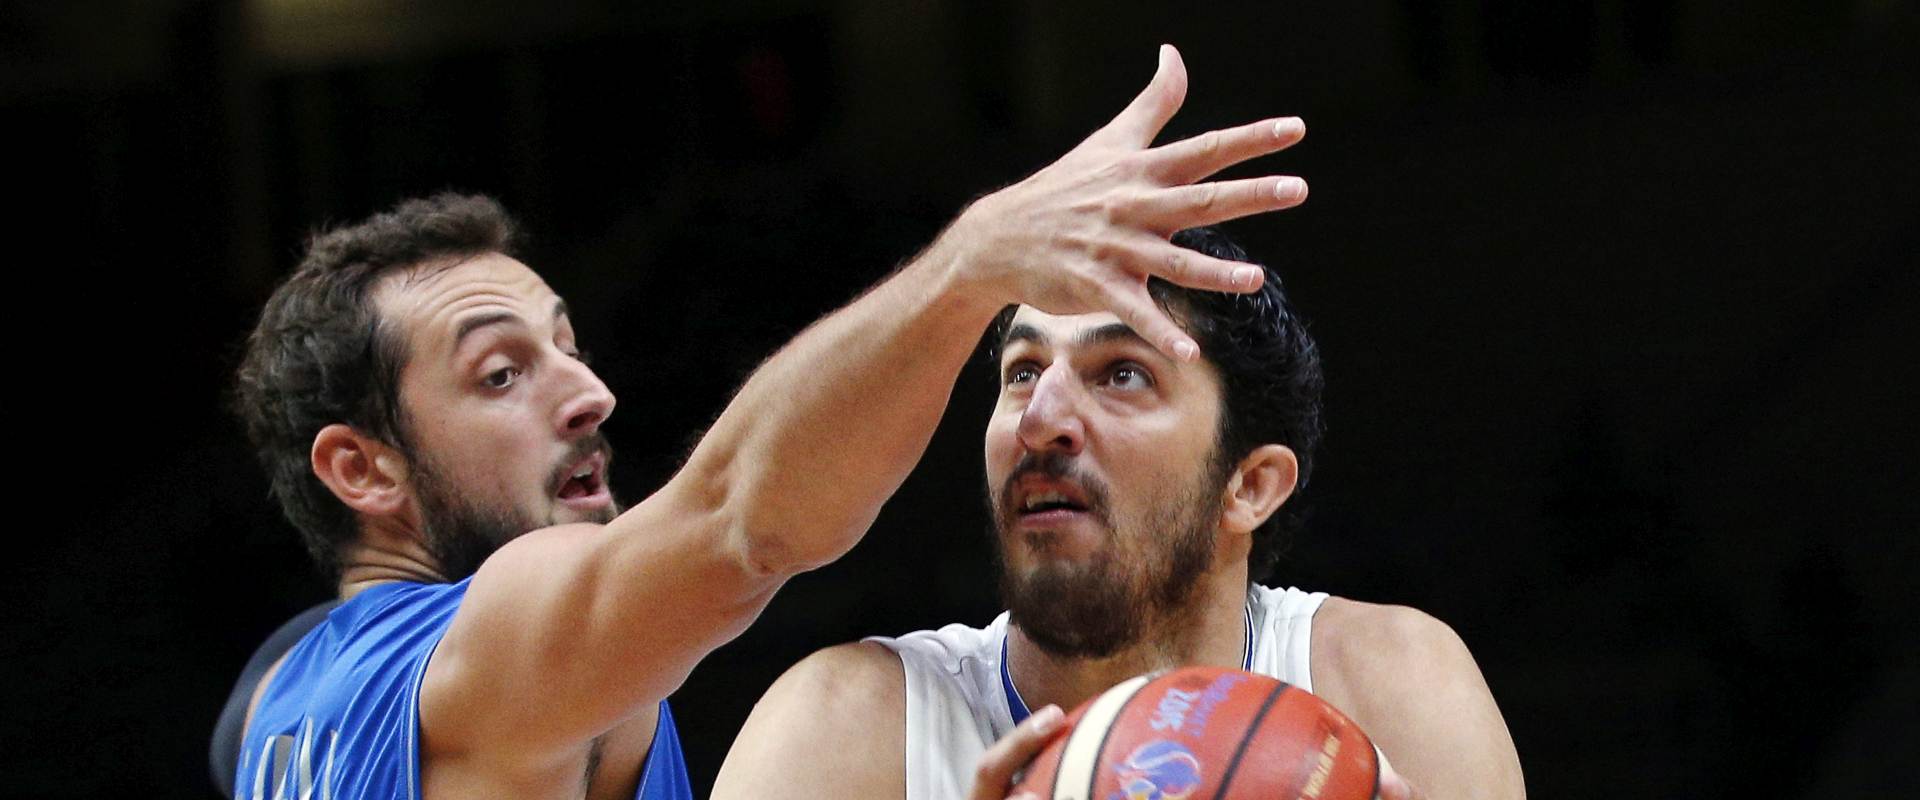 epa04928810 Israel's Lior Eliyahu (R) in action against Italy's Marco Belinelli (L) during the EuroBasket 2015 Round of 16 match between Israel and Italy at the Pierre Mauroy Stadium in Lille, France, 13 September 2015.  EPA/YOAN VALAT